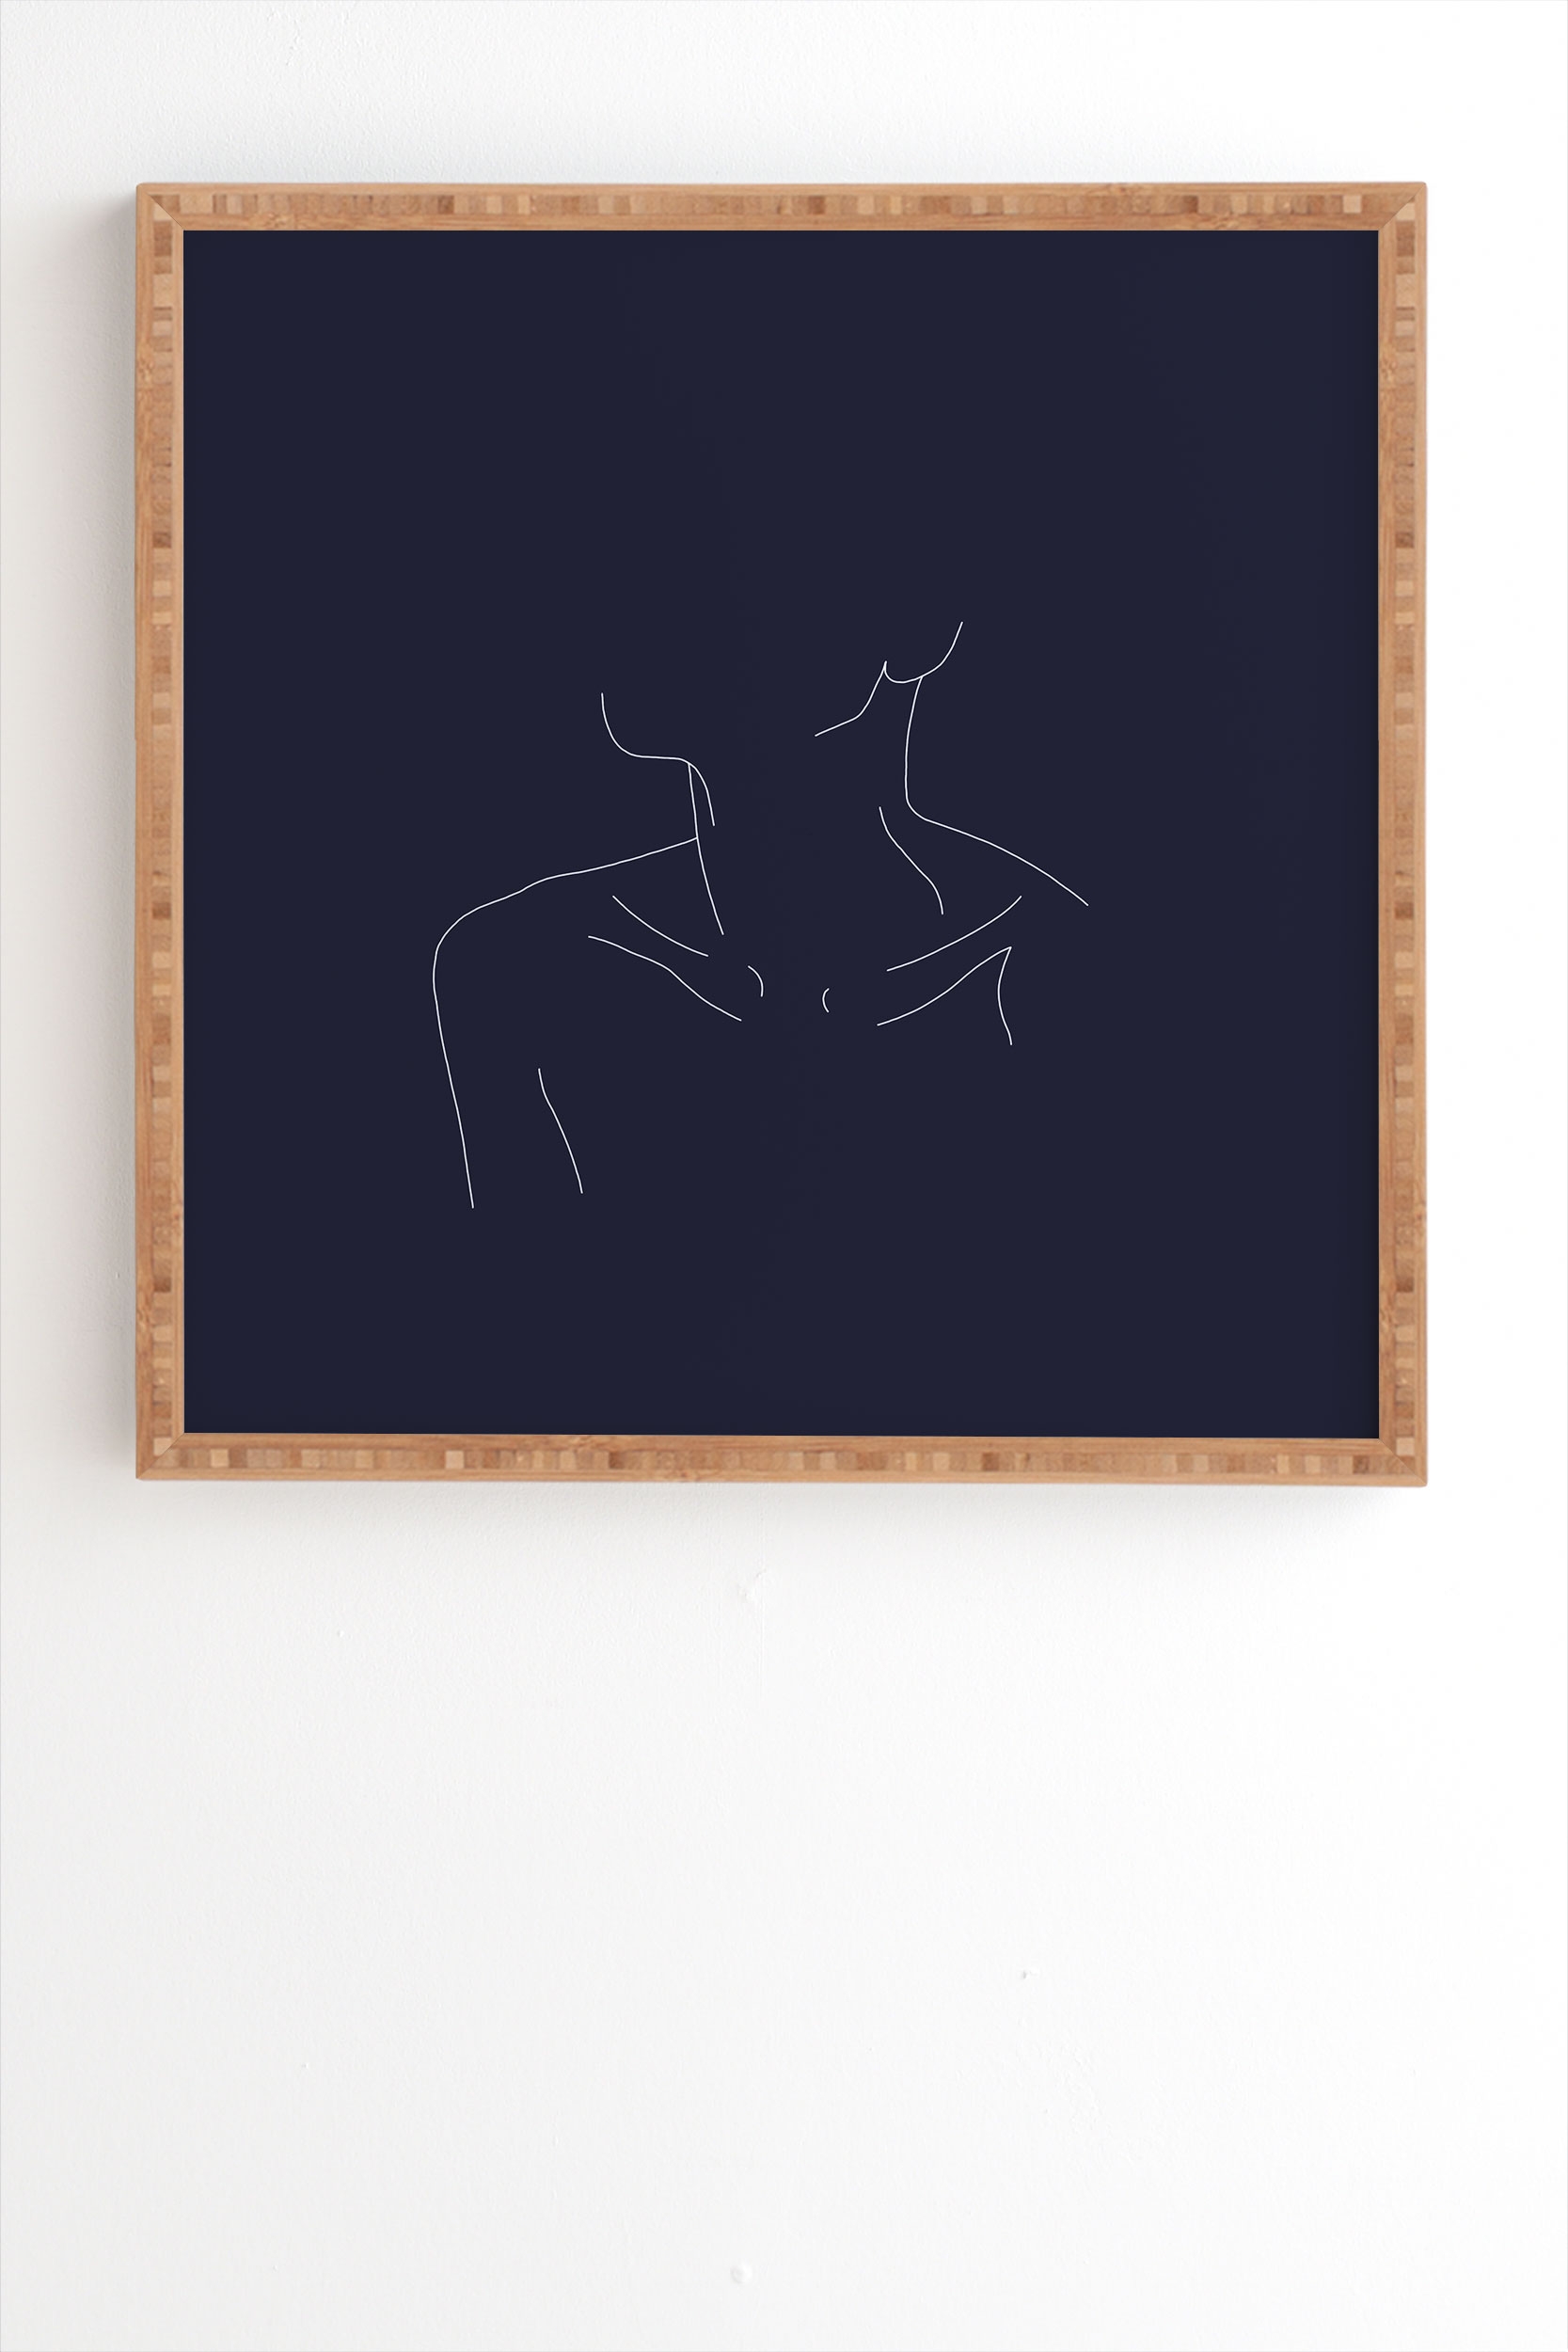 Female Illustration Ali Blue by The Colour Study - Framed Wall Art Bamboo 19" x 22.4" - Image 1